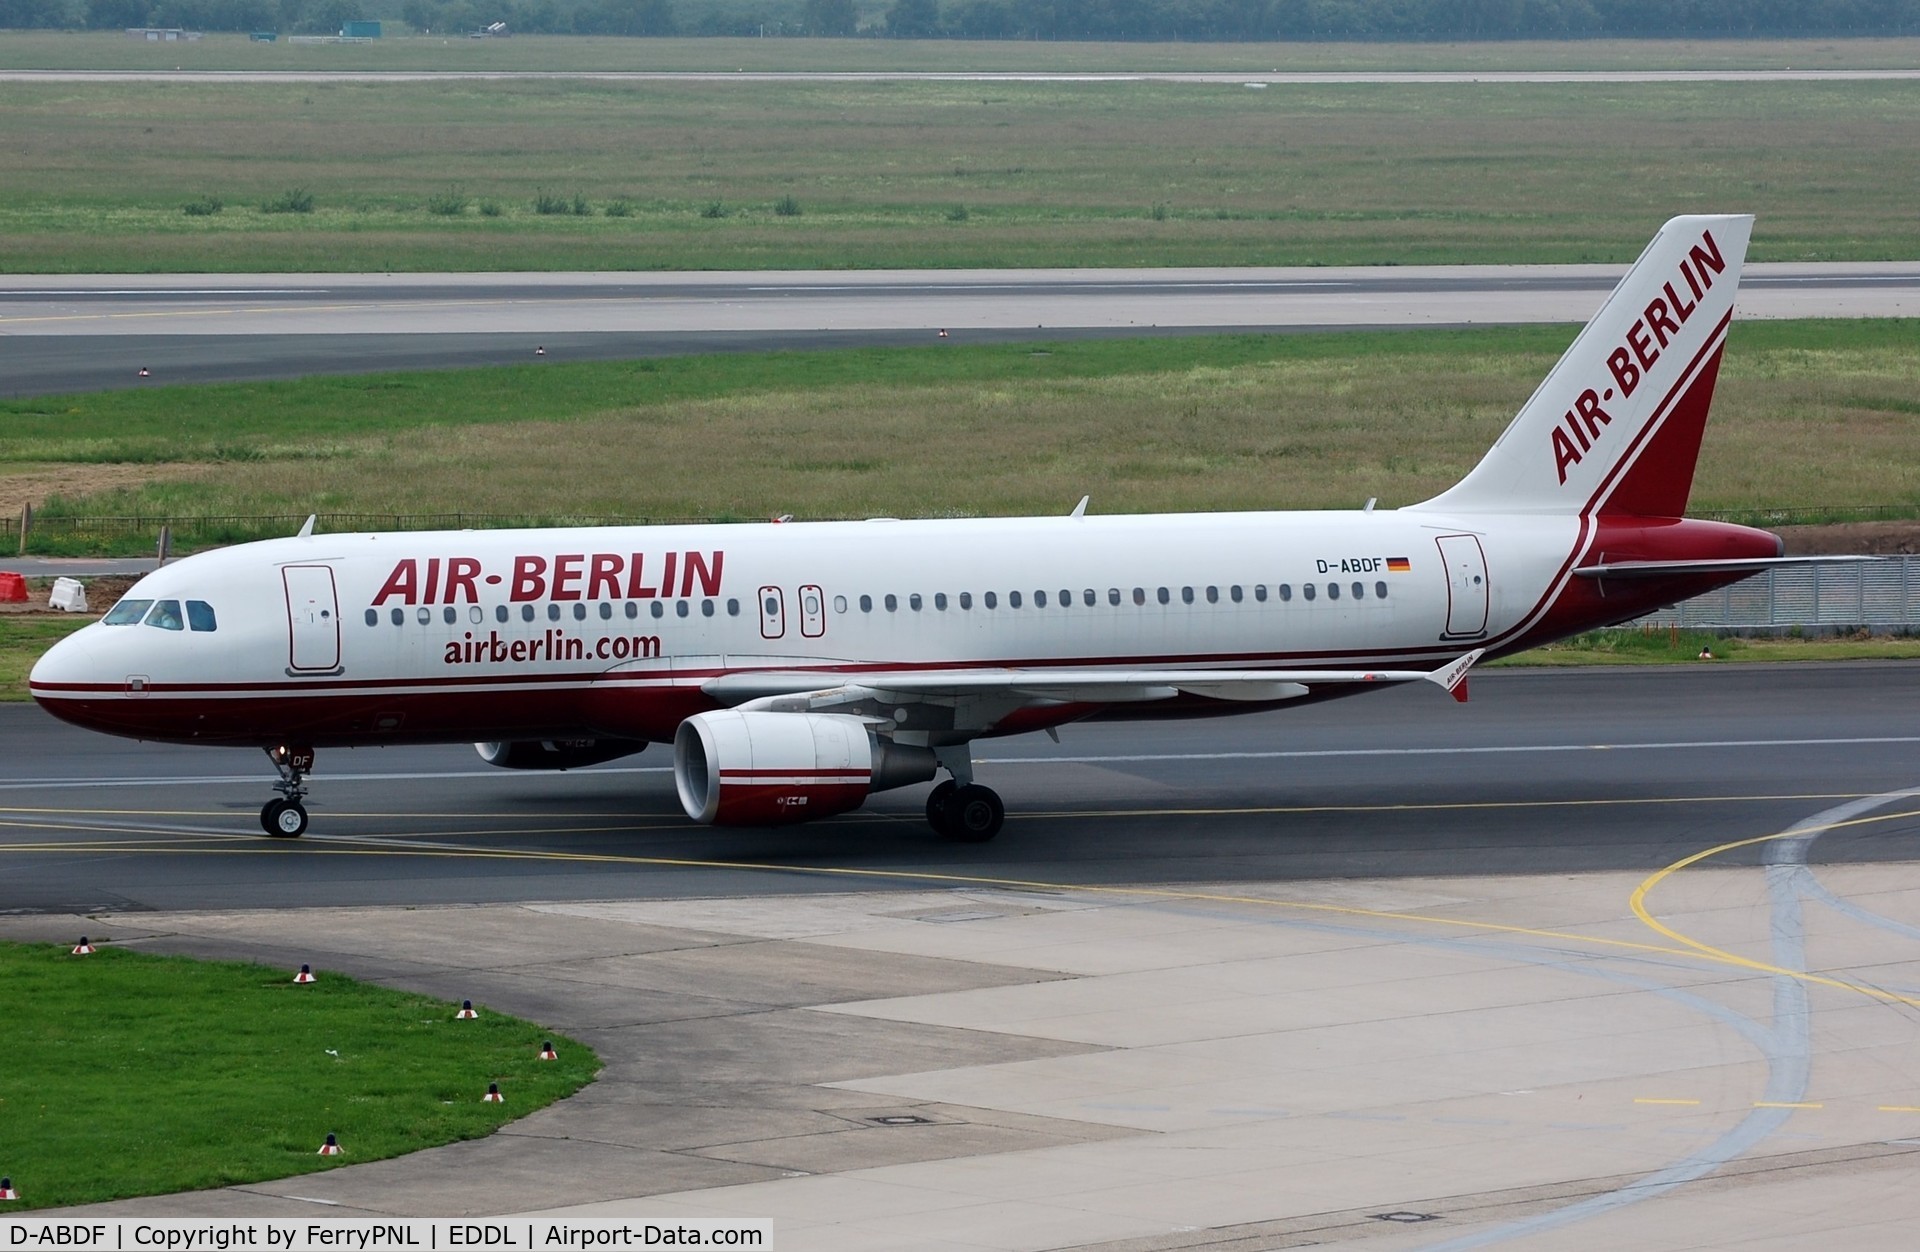 D-ABDF, 2006 Airbus A320-214 C/N 2820, Air Berlin A320 now operating for Chendu Airlines in China.